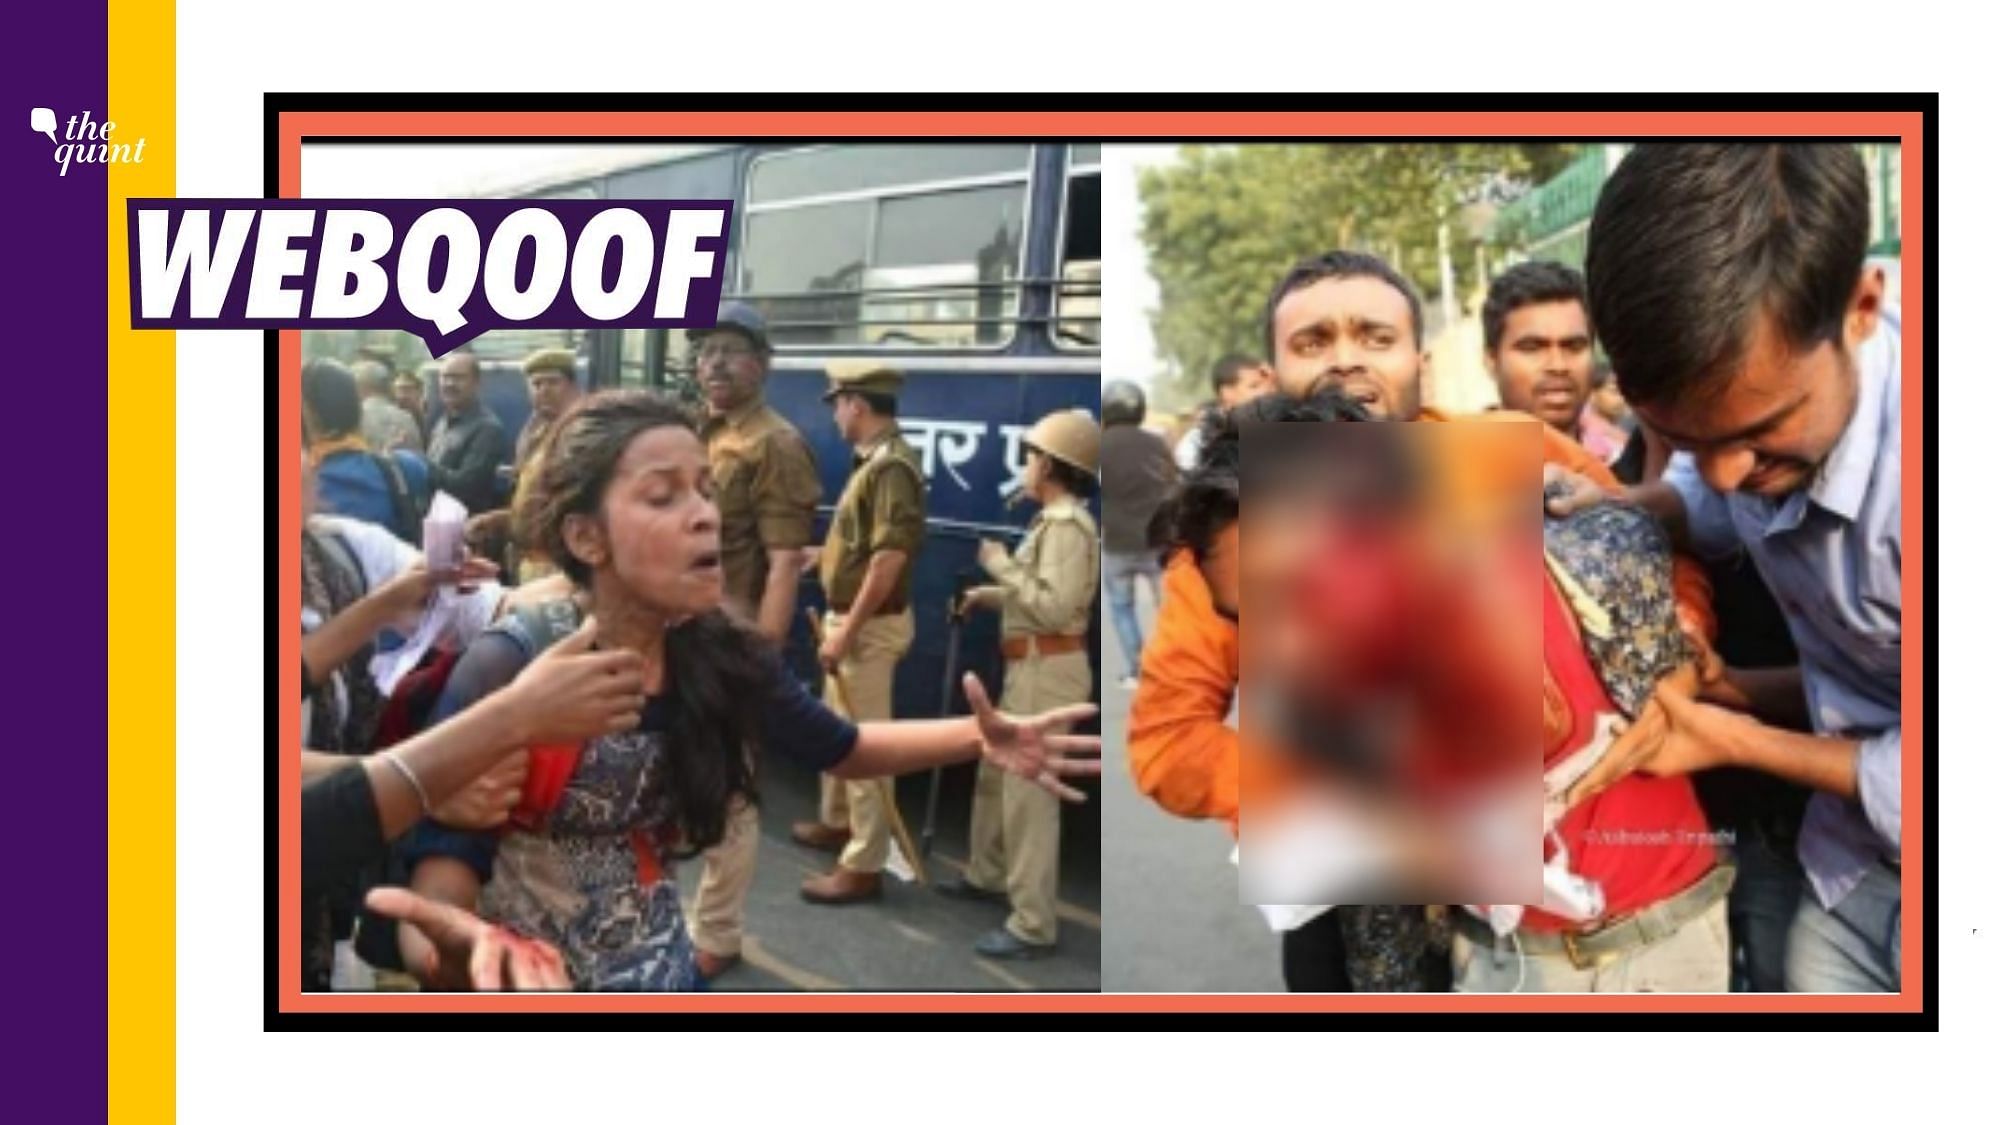 While students and youth have been protesting regarding the issue of unemployment in Uttar Pradesh, these images are old and from a 2018 protest regarding recruitment of assistant teachers.